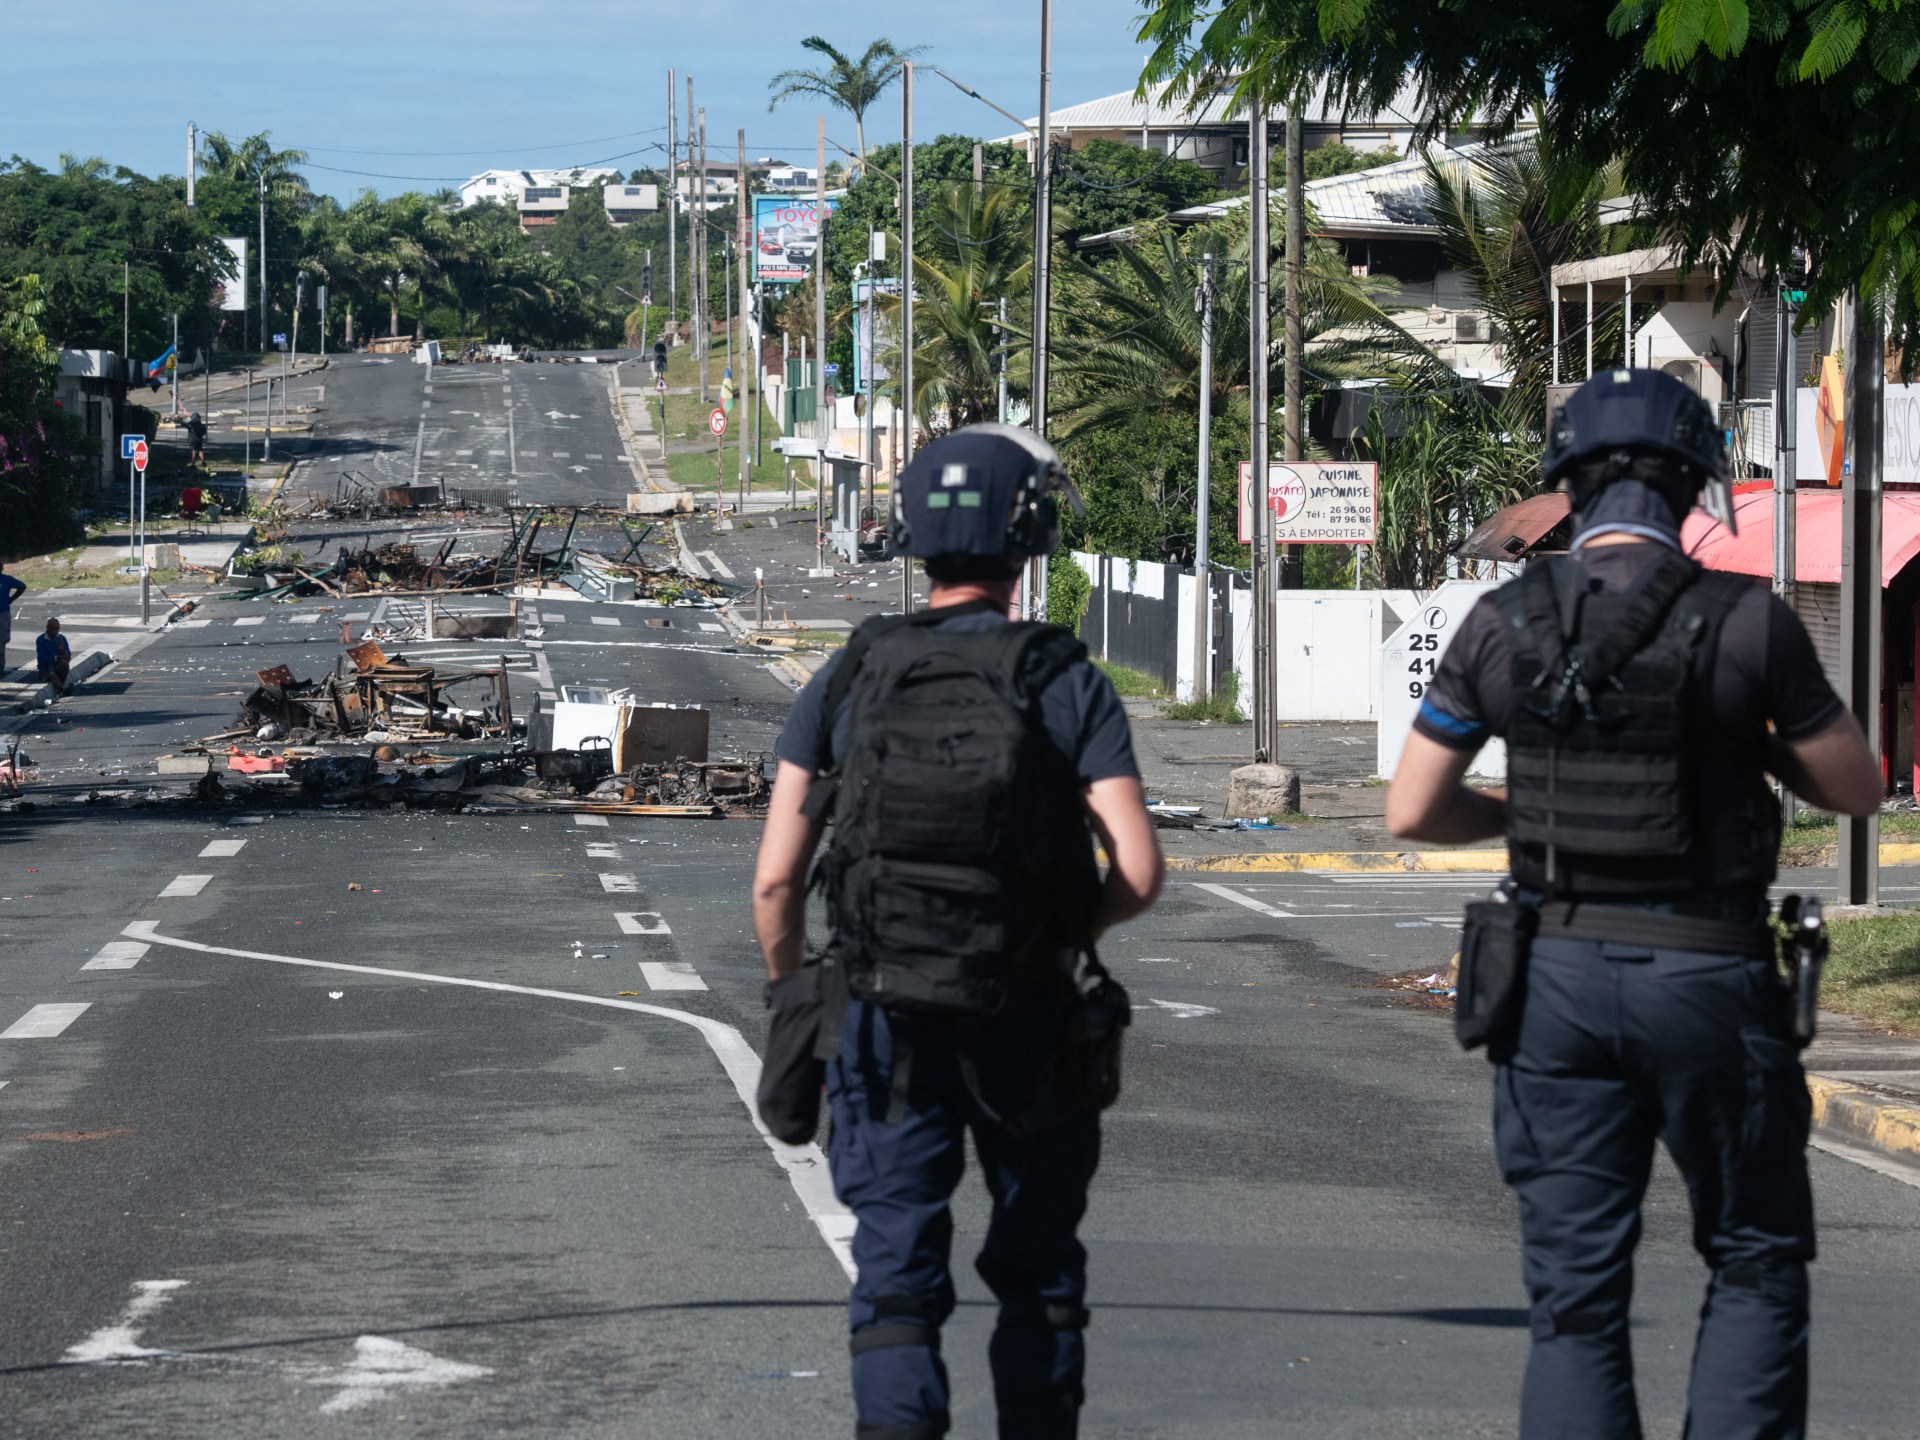 Death toll rises to six in New Caledonia riots as unrest spreads | Politics News [Video]